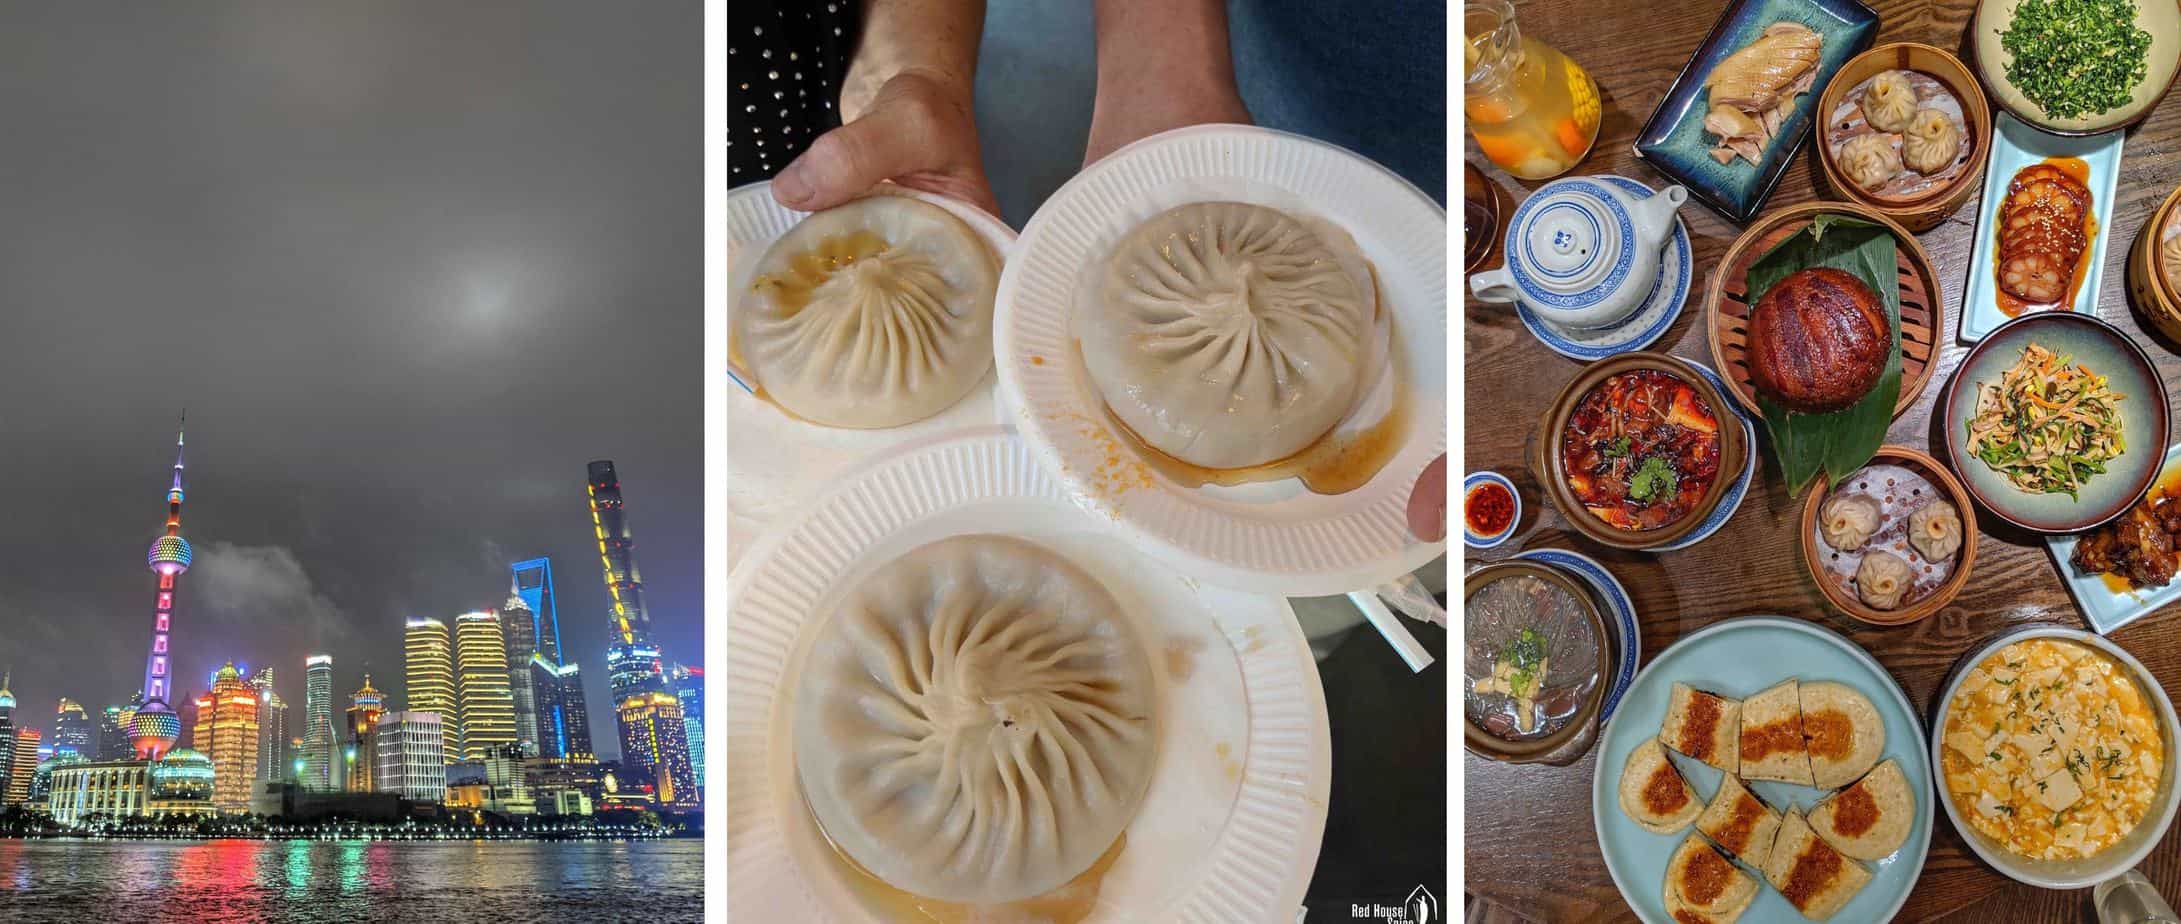 Culinary Tour of China 2020 by RED HOUSE SPICE-shanghai